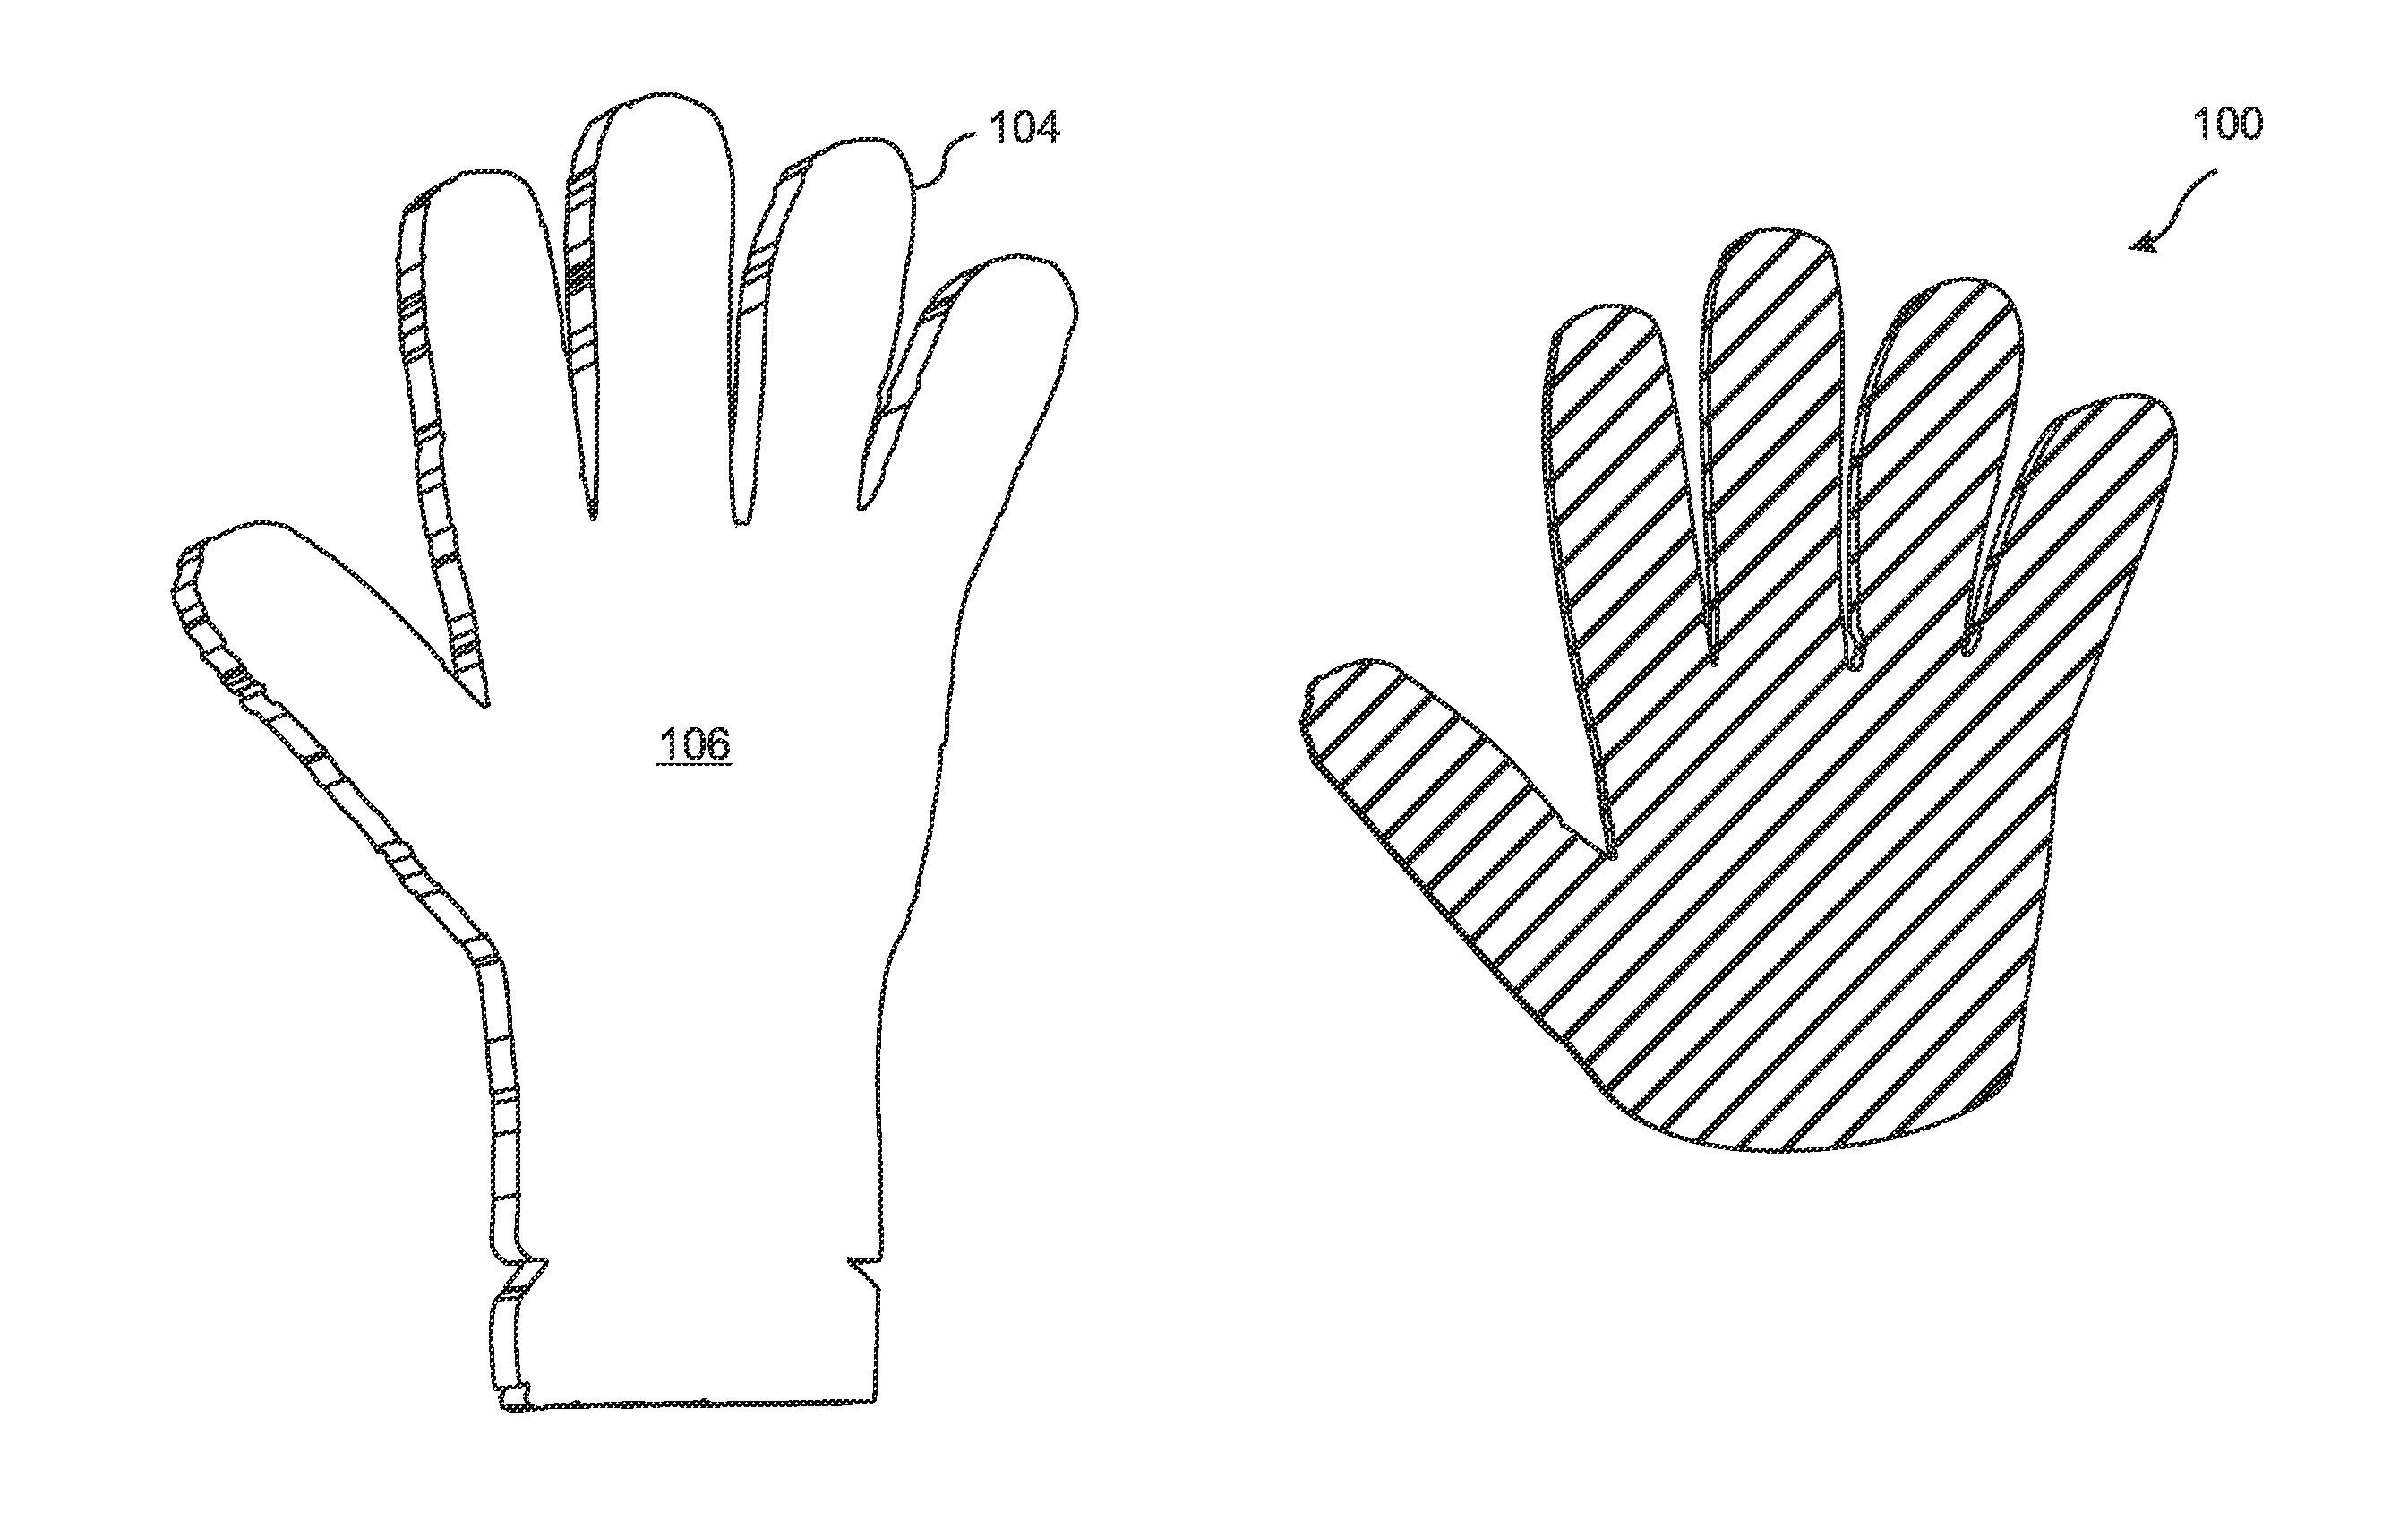 Three dimensional glove with performance-enhancing layer laminated thereto